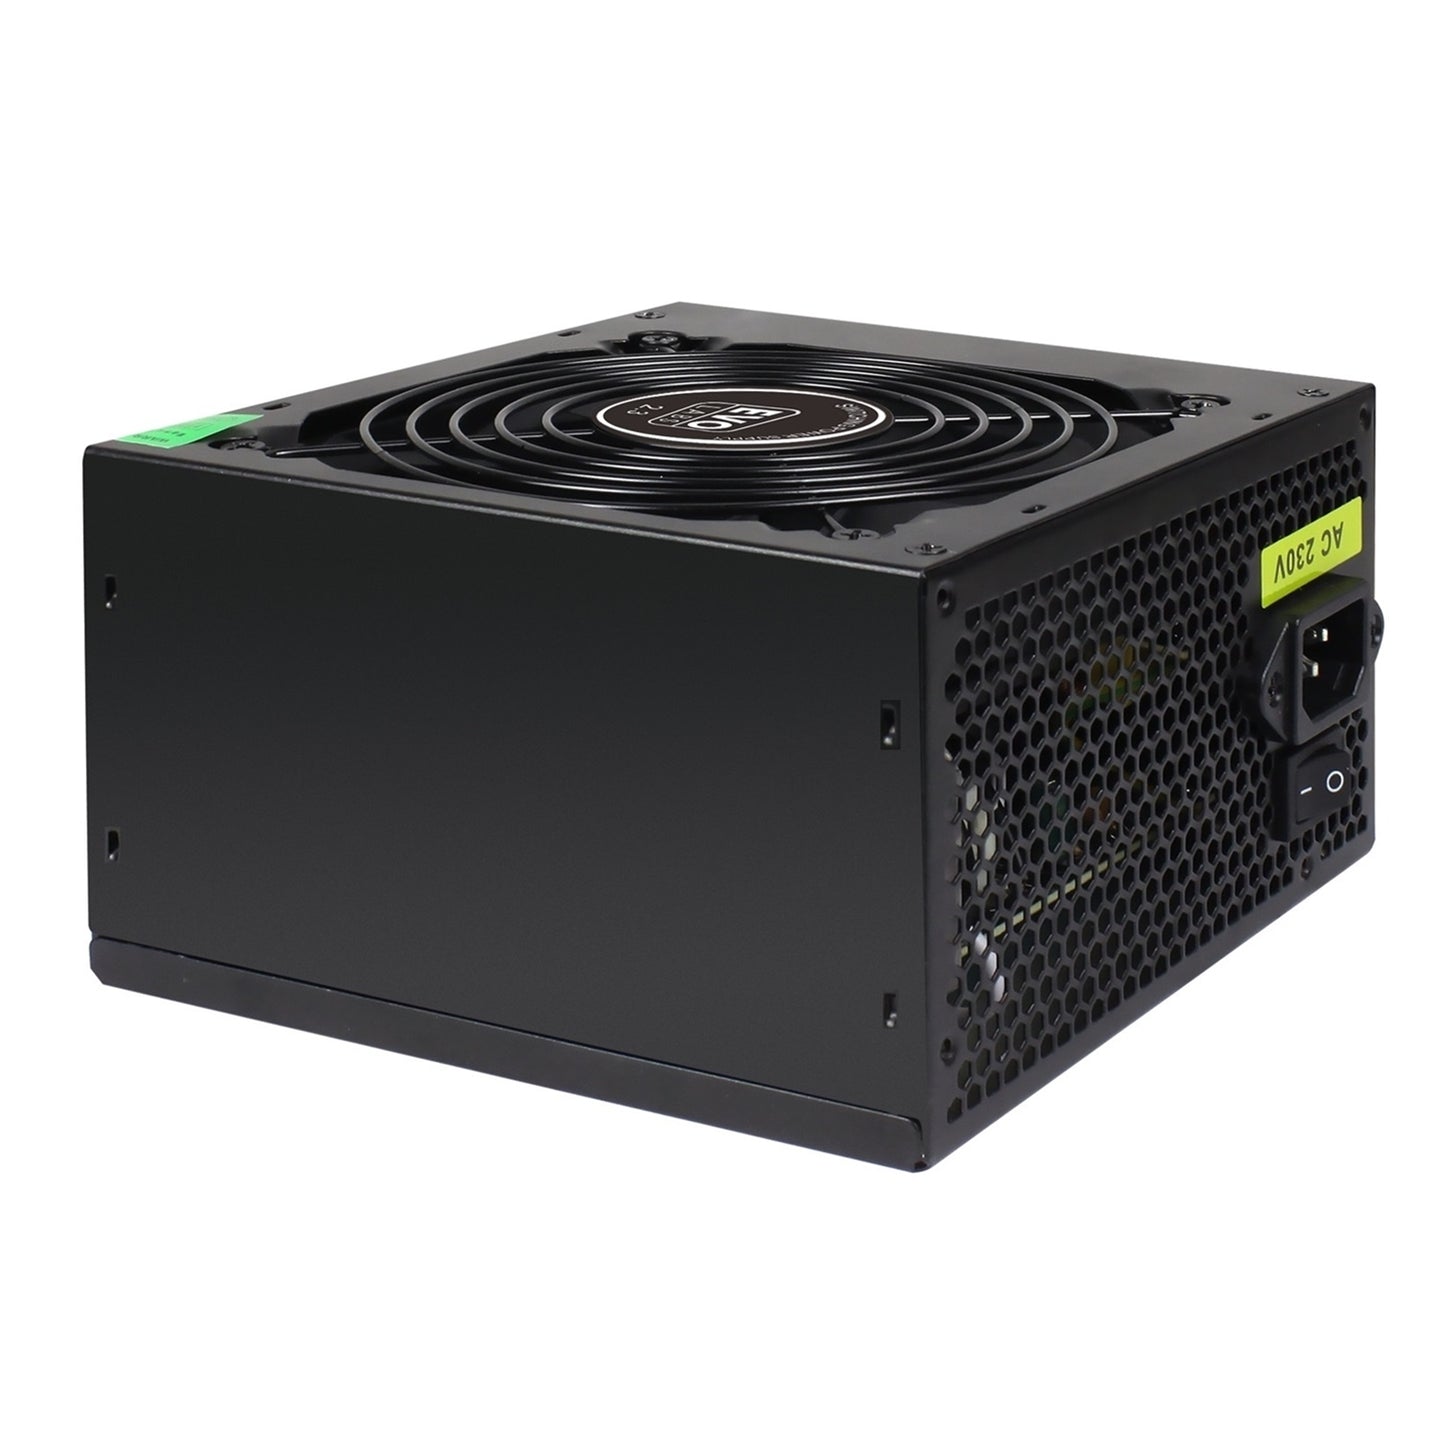 EVO LABS BR500-12BL 500W PSU, 120mm Black Silent Fan with Improved Ventilation, Non Modular, Stable & Reliable, Retail Packaged